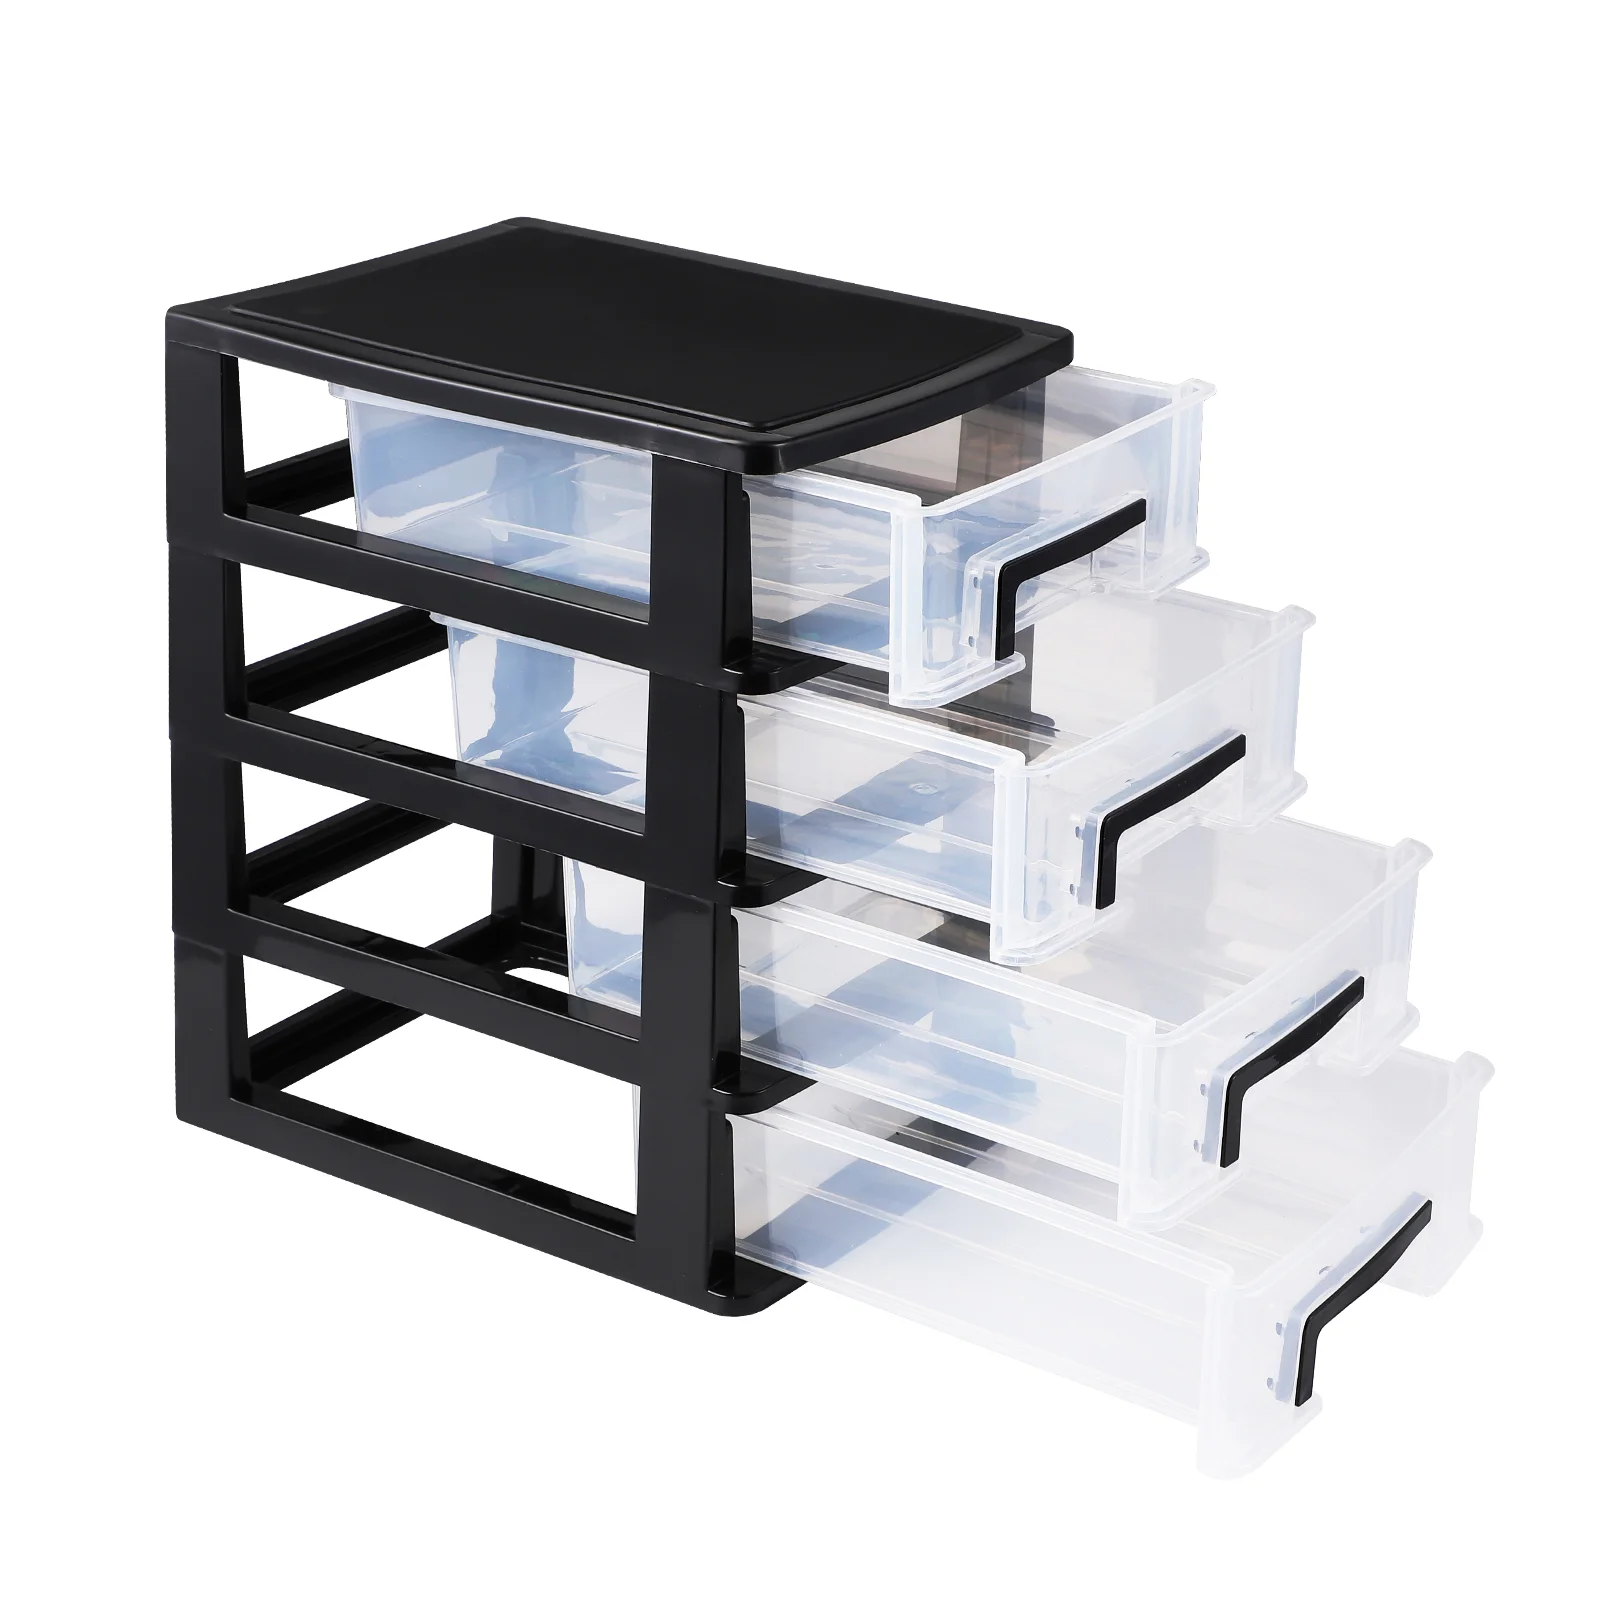 

Organizer Drawer Storage Desktop Desk Drawers Organizers Craft Box Office Room Containers Dorm Tier Makeup Type Clear Tabletop